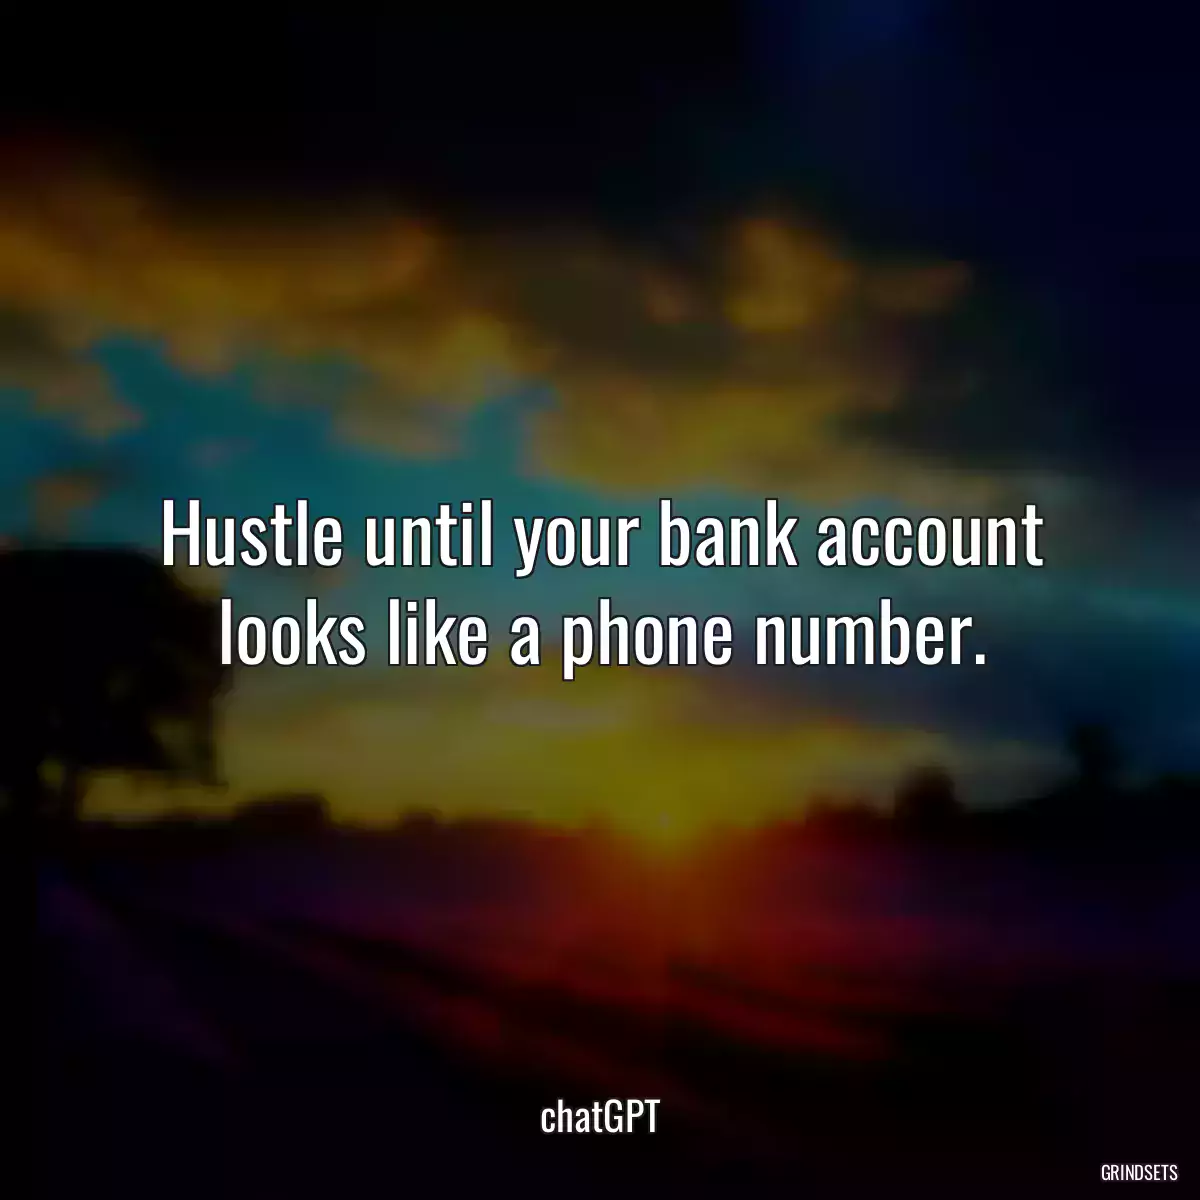 Hustle until your bank account looks like a phone number.